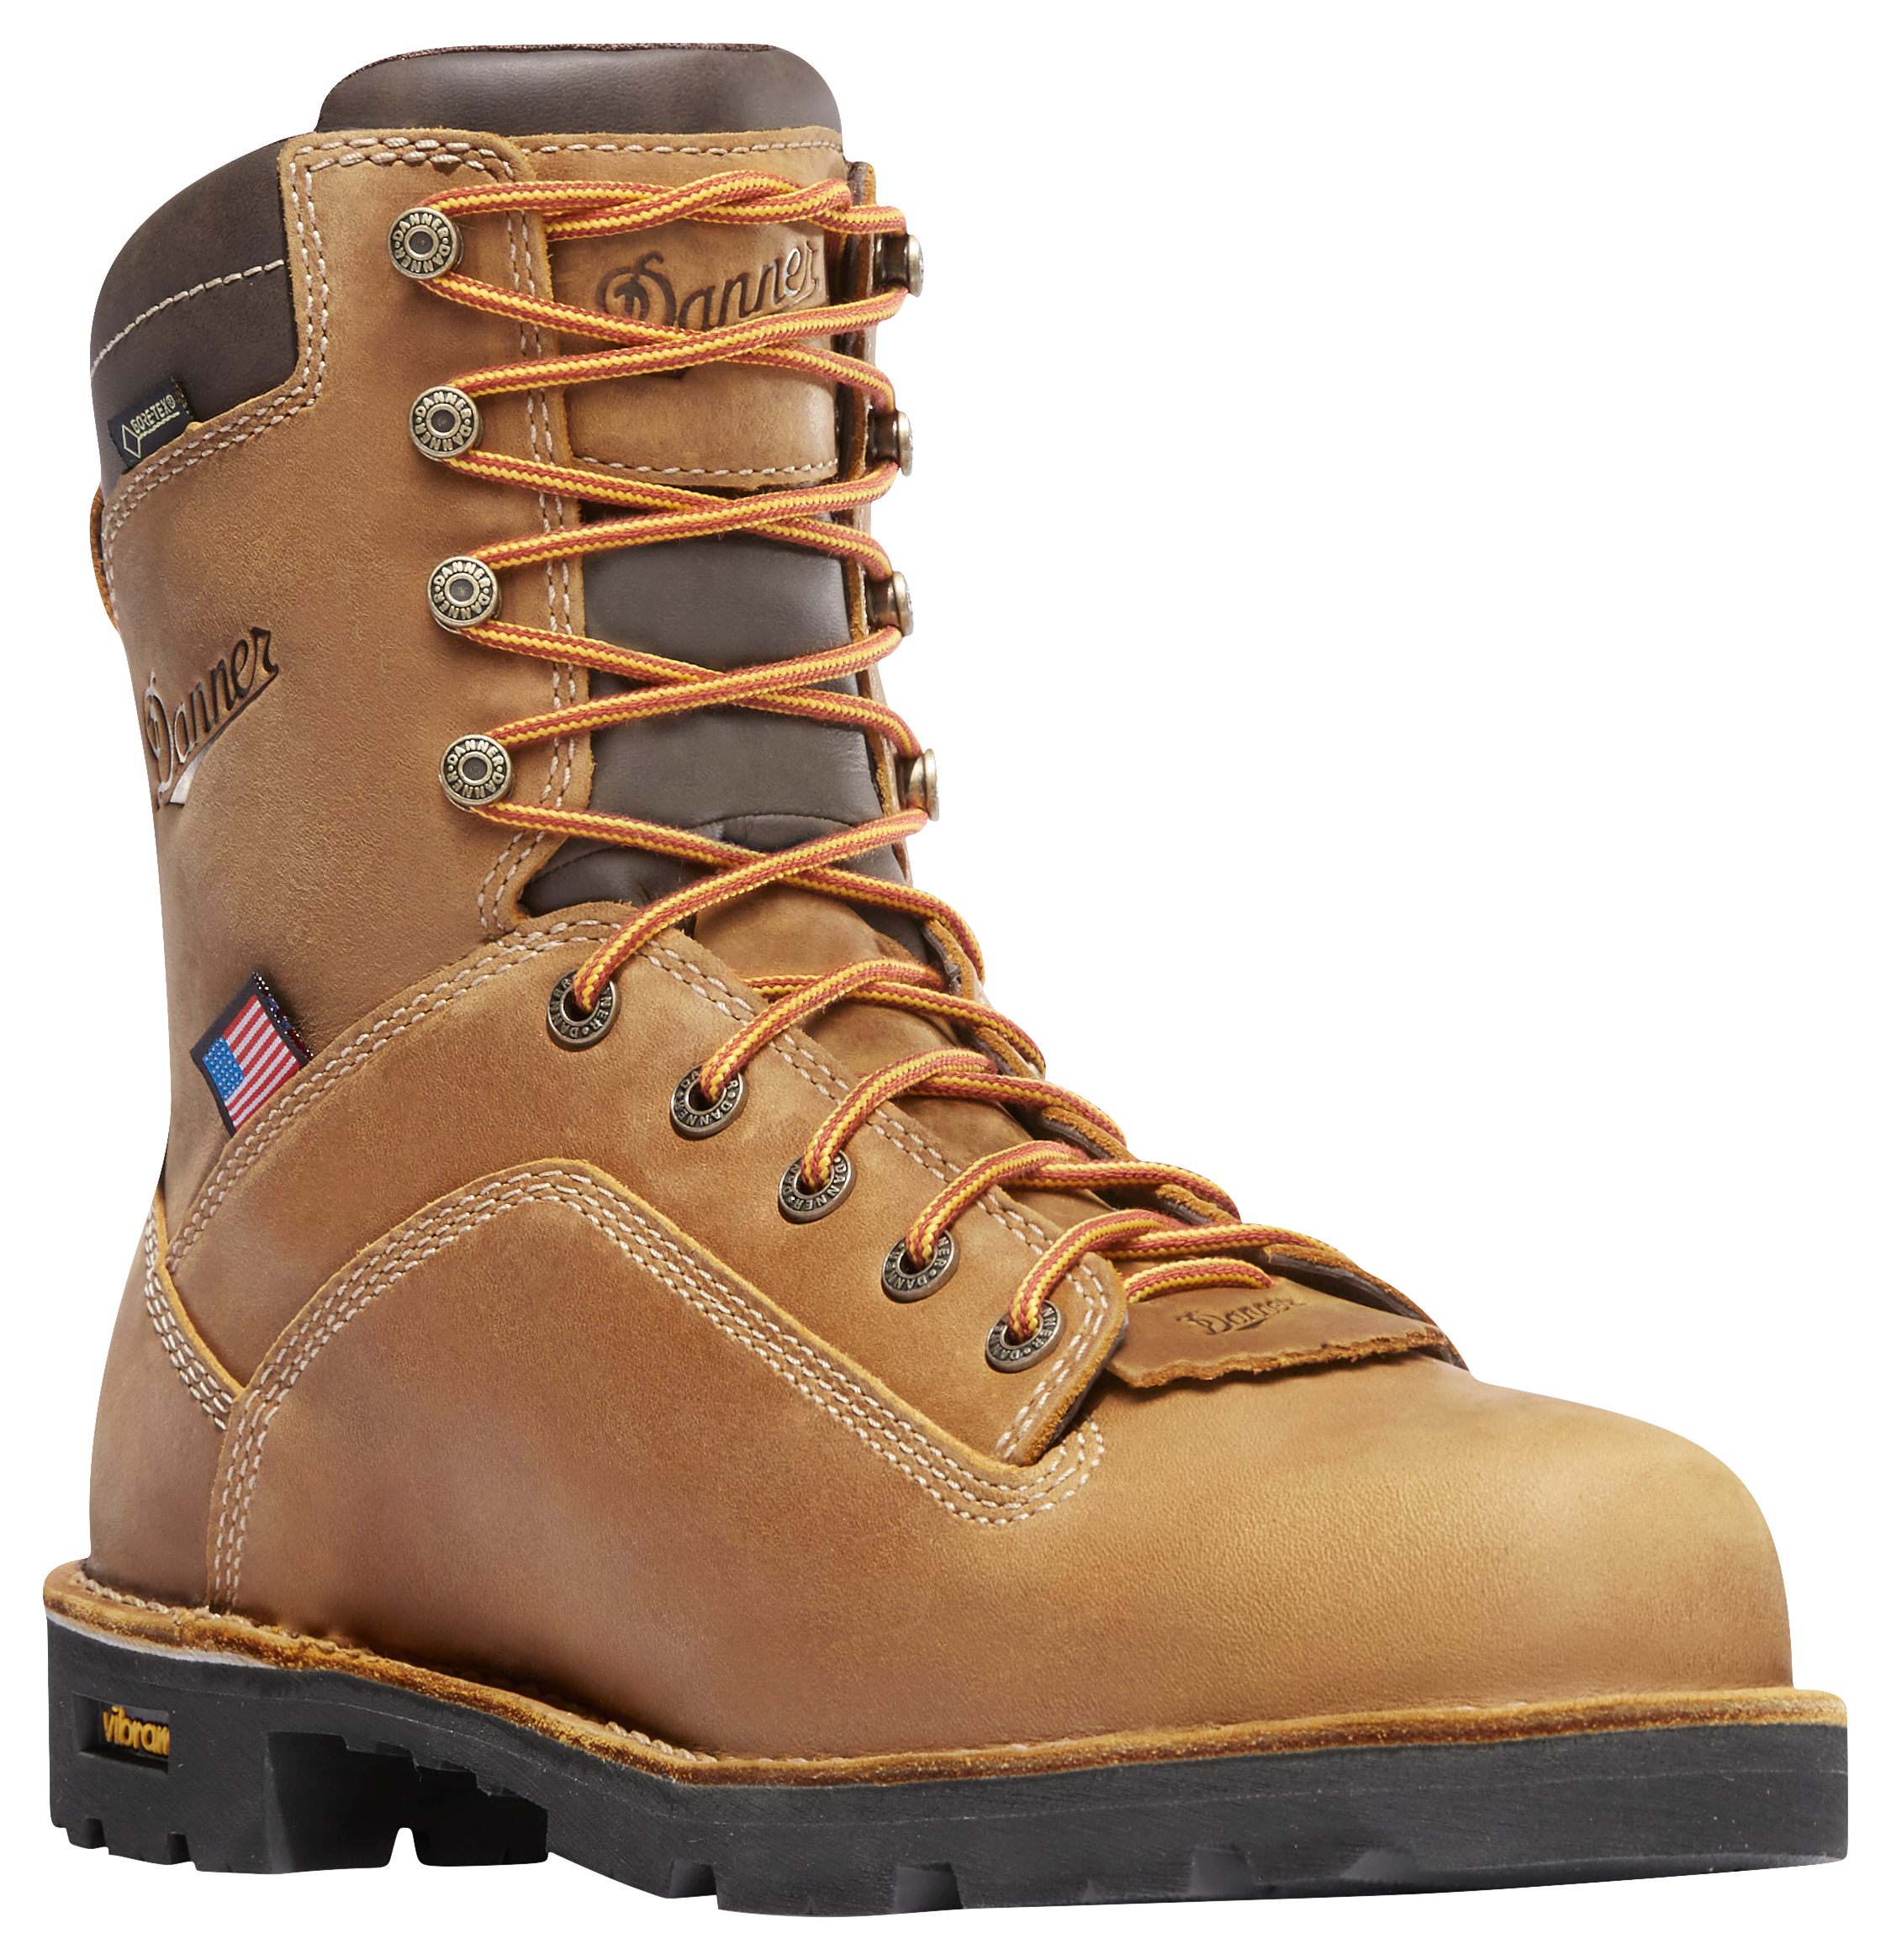 Danner Quarry USA GORE-TEX Insulated Work Boots for Men - Distress Brown - 12M